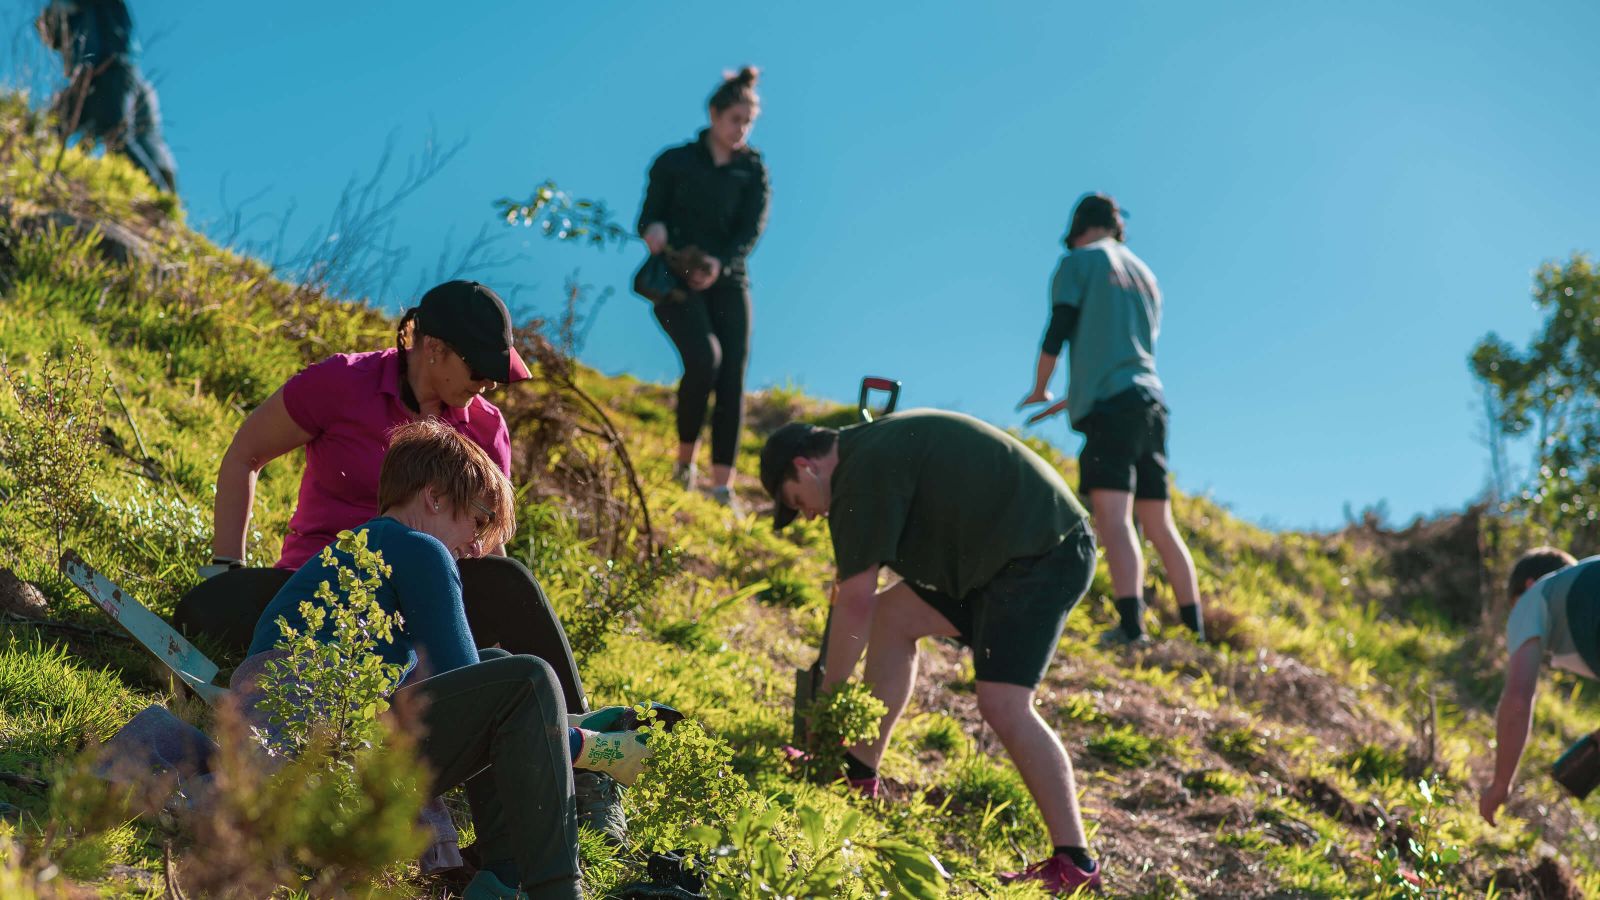 A group of students planting trees on a hill side under a blue sky.